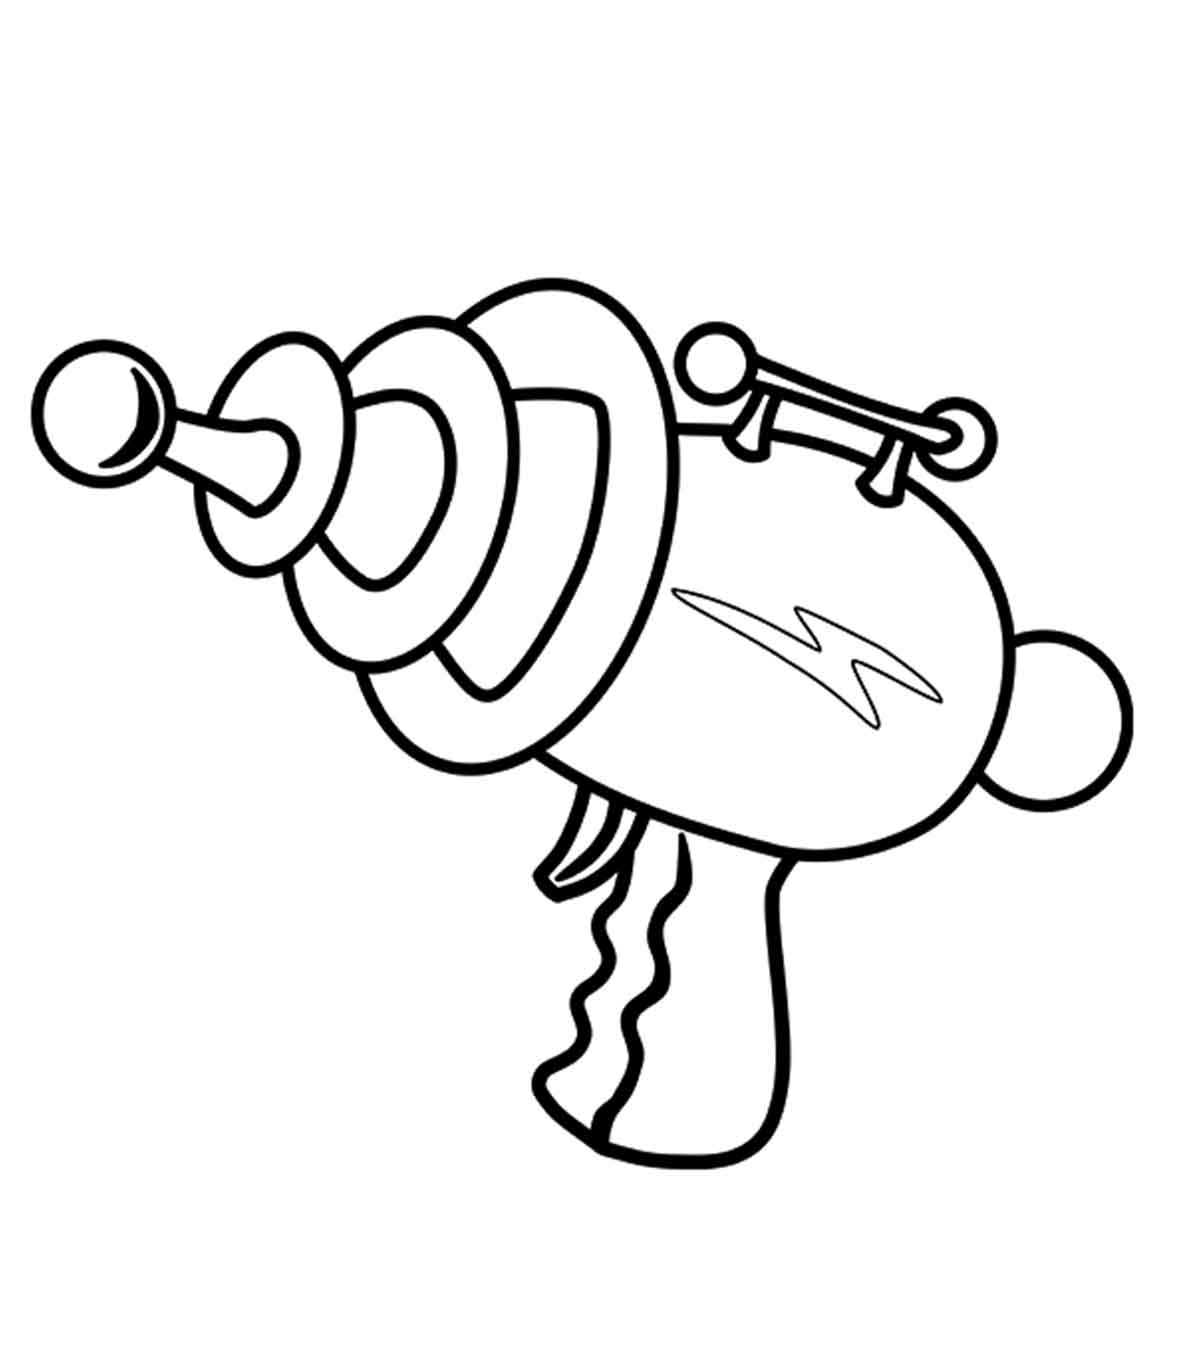 Gun Coloring Pages Gun Coloring Pages For The Little Adventurer In Your House